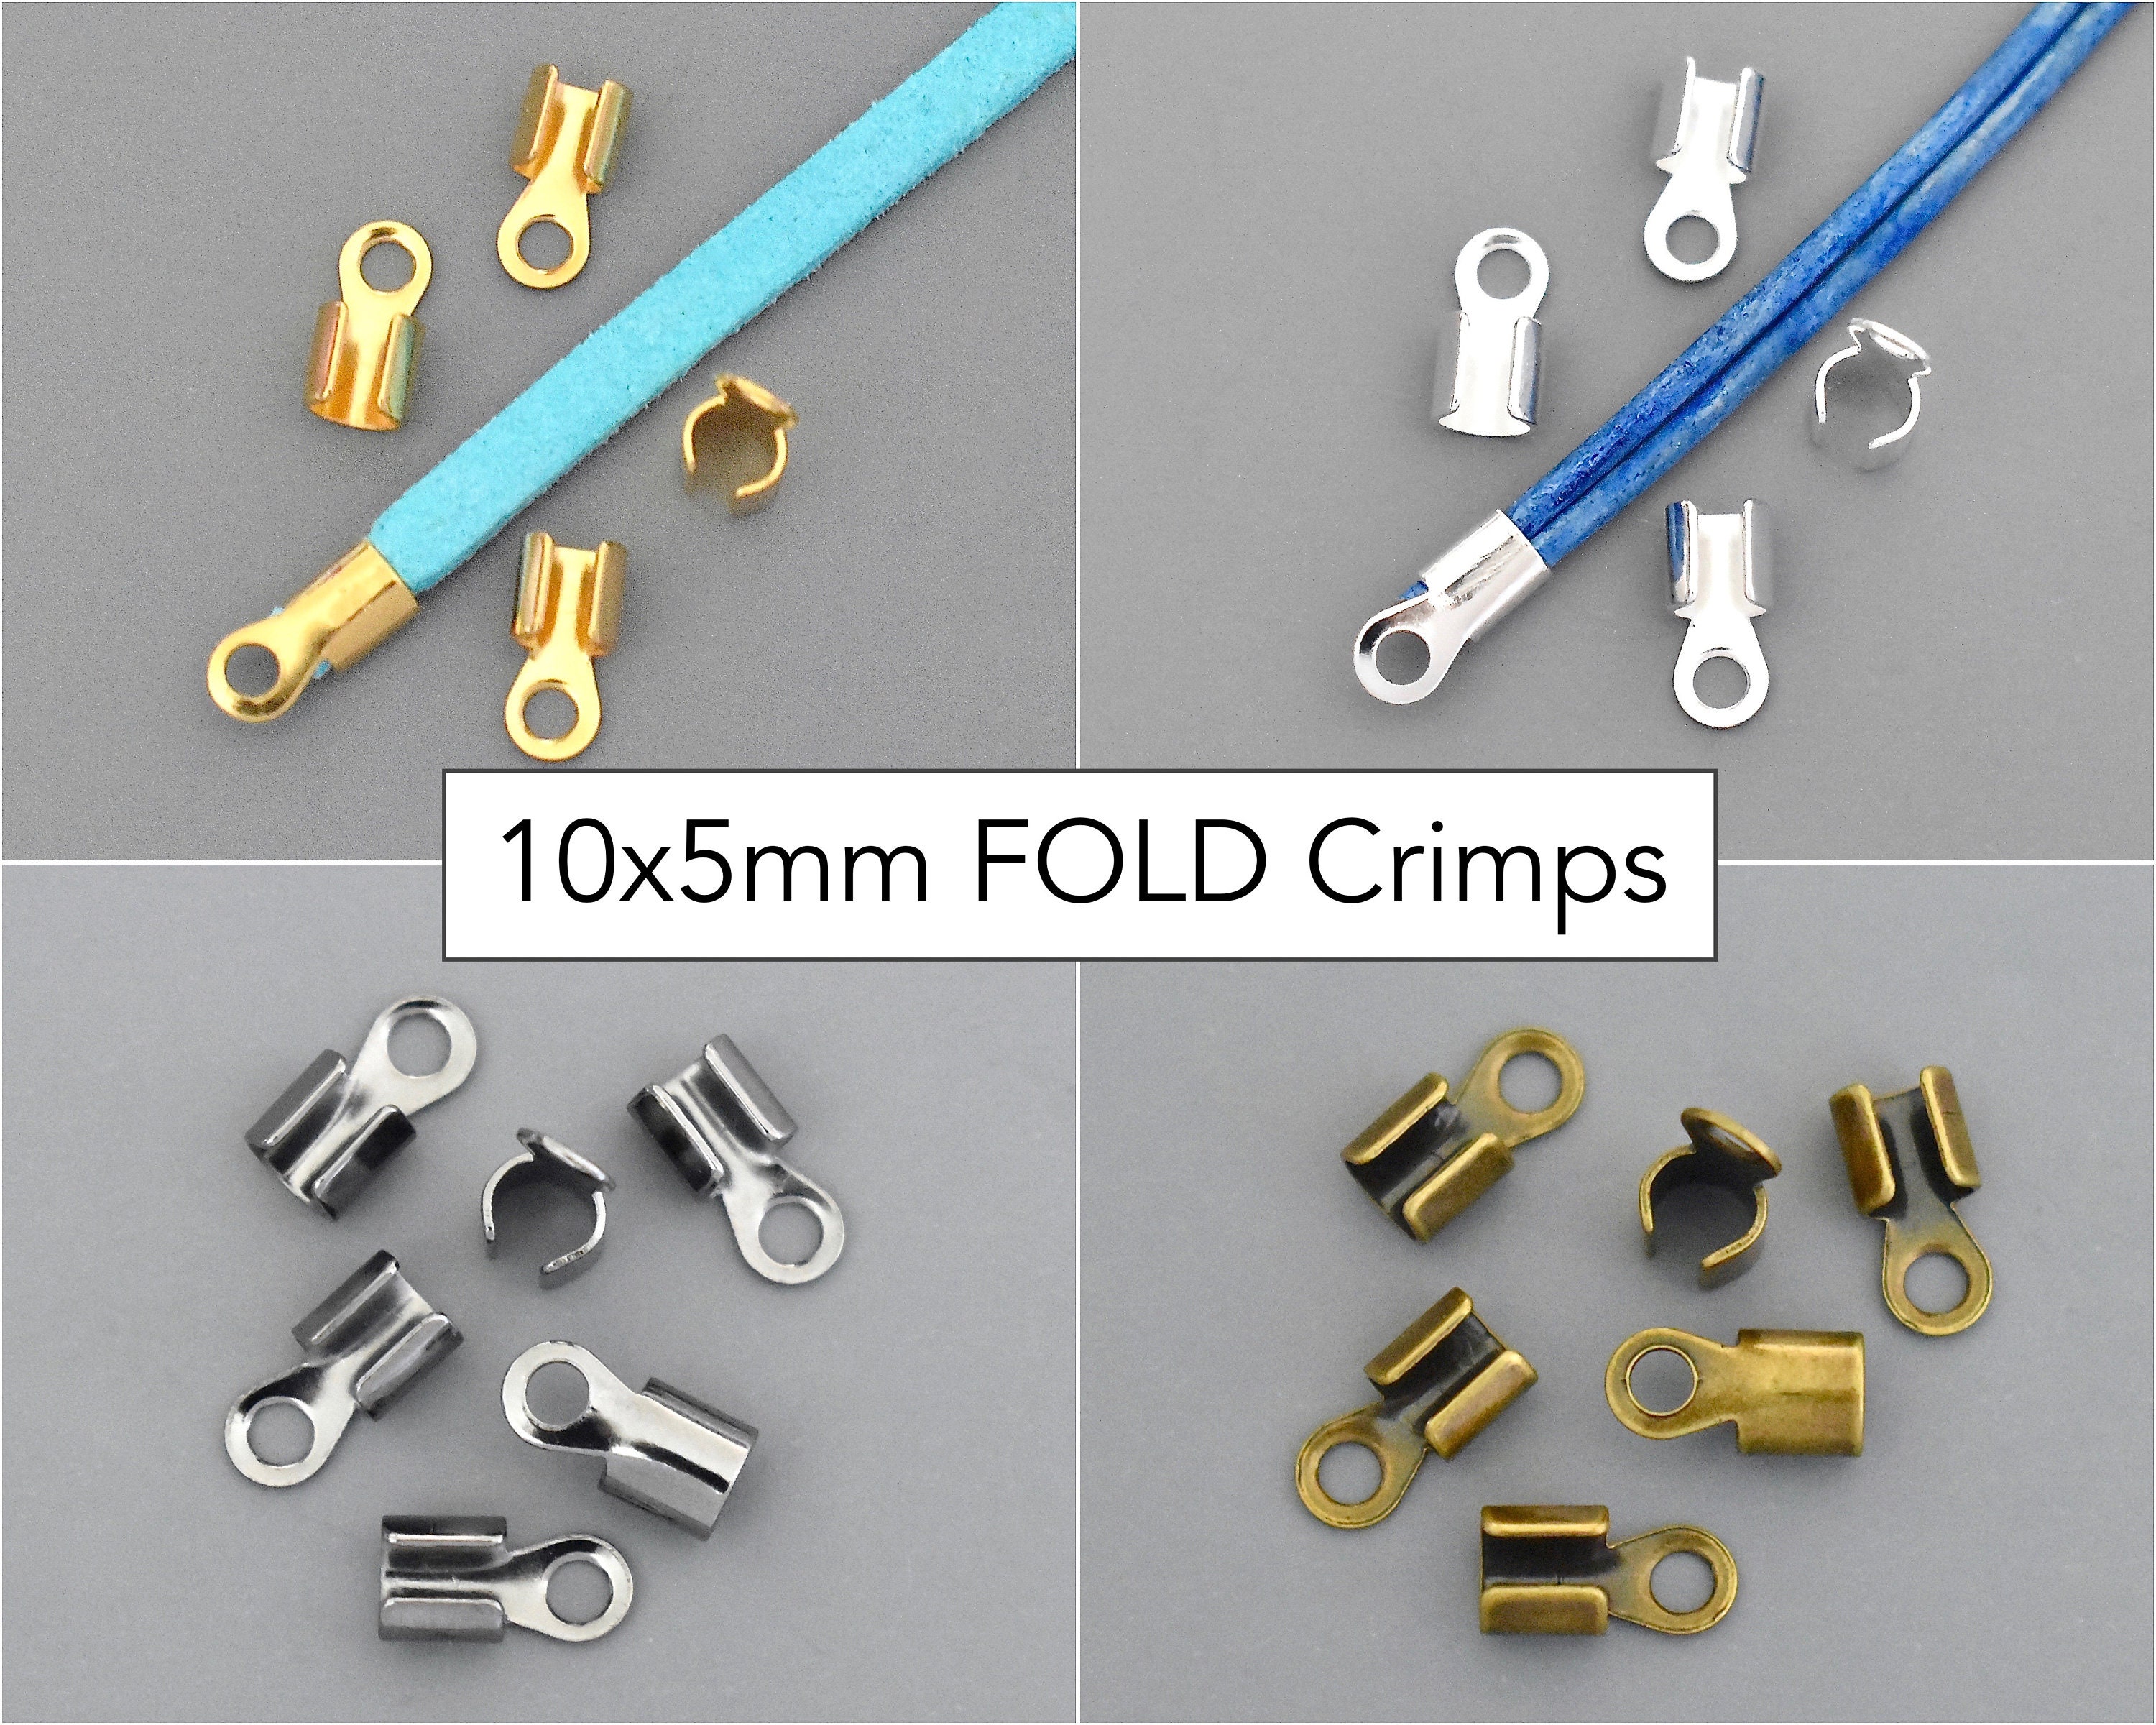 4pcs/set Cylindrical Metal Zipper Pulls With Random Colors, Detachable,  Suitable For Replacing Zipper On Bags, Shoes, Clothes, And Small Zipper  Locks